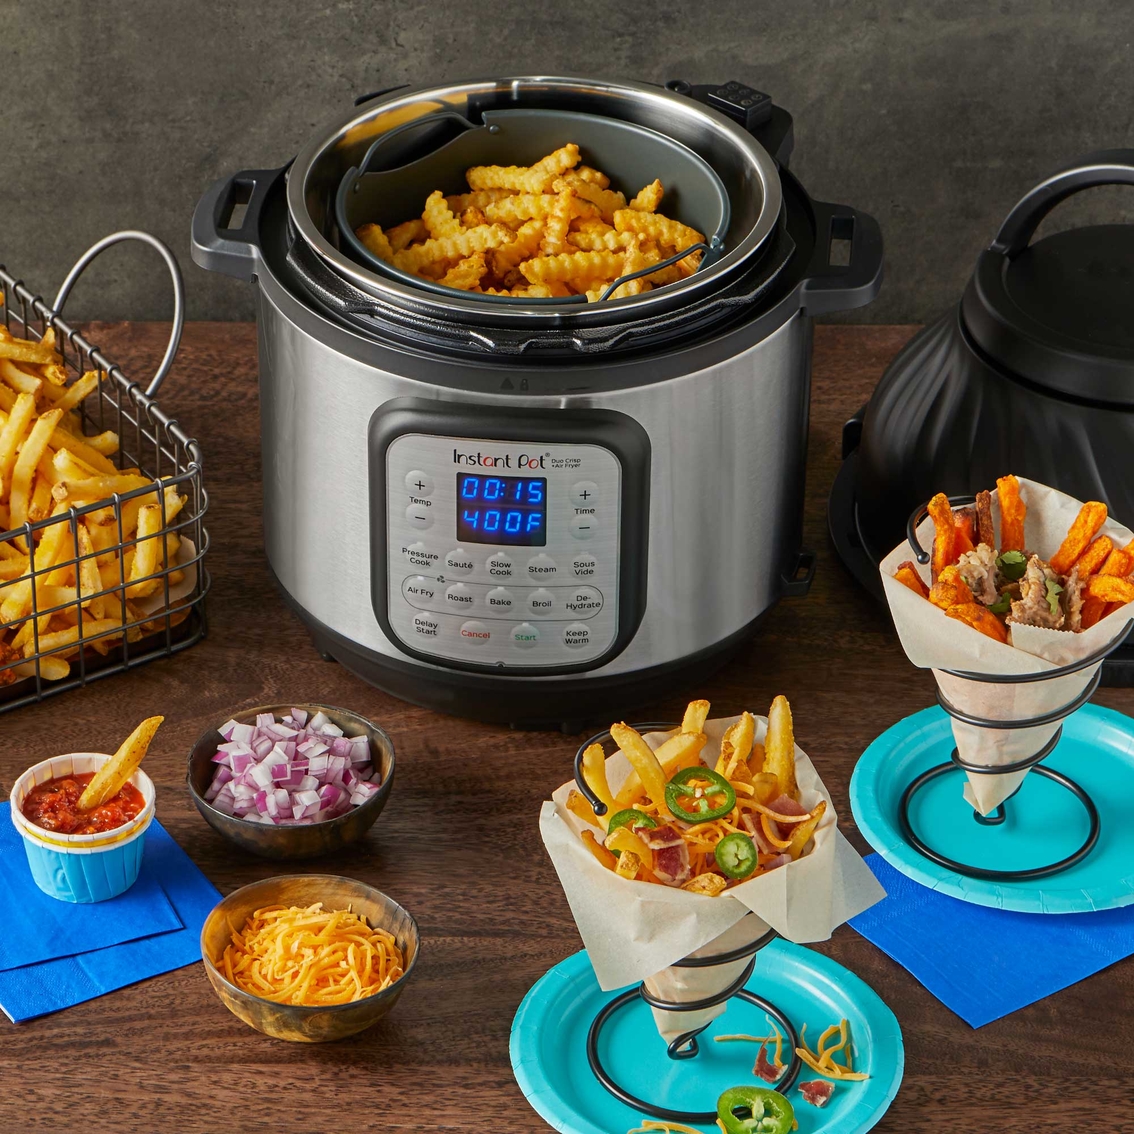 Instant Pot Duo Crisp Multi Use Programmable Pressure Cooker and Air Fryer Combo - Image 6 of 6